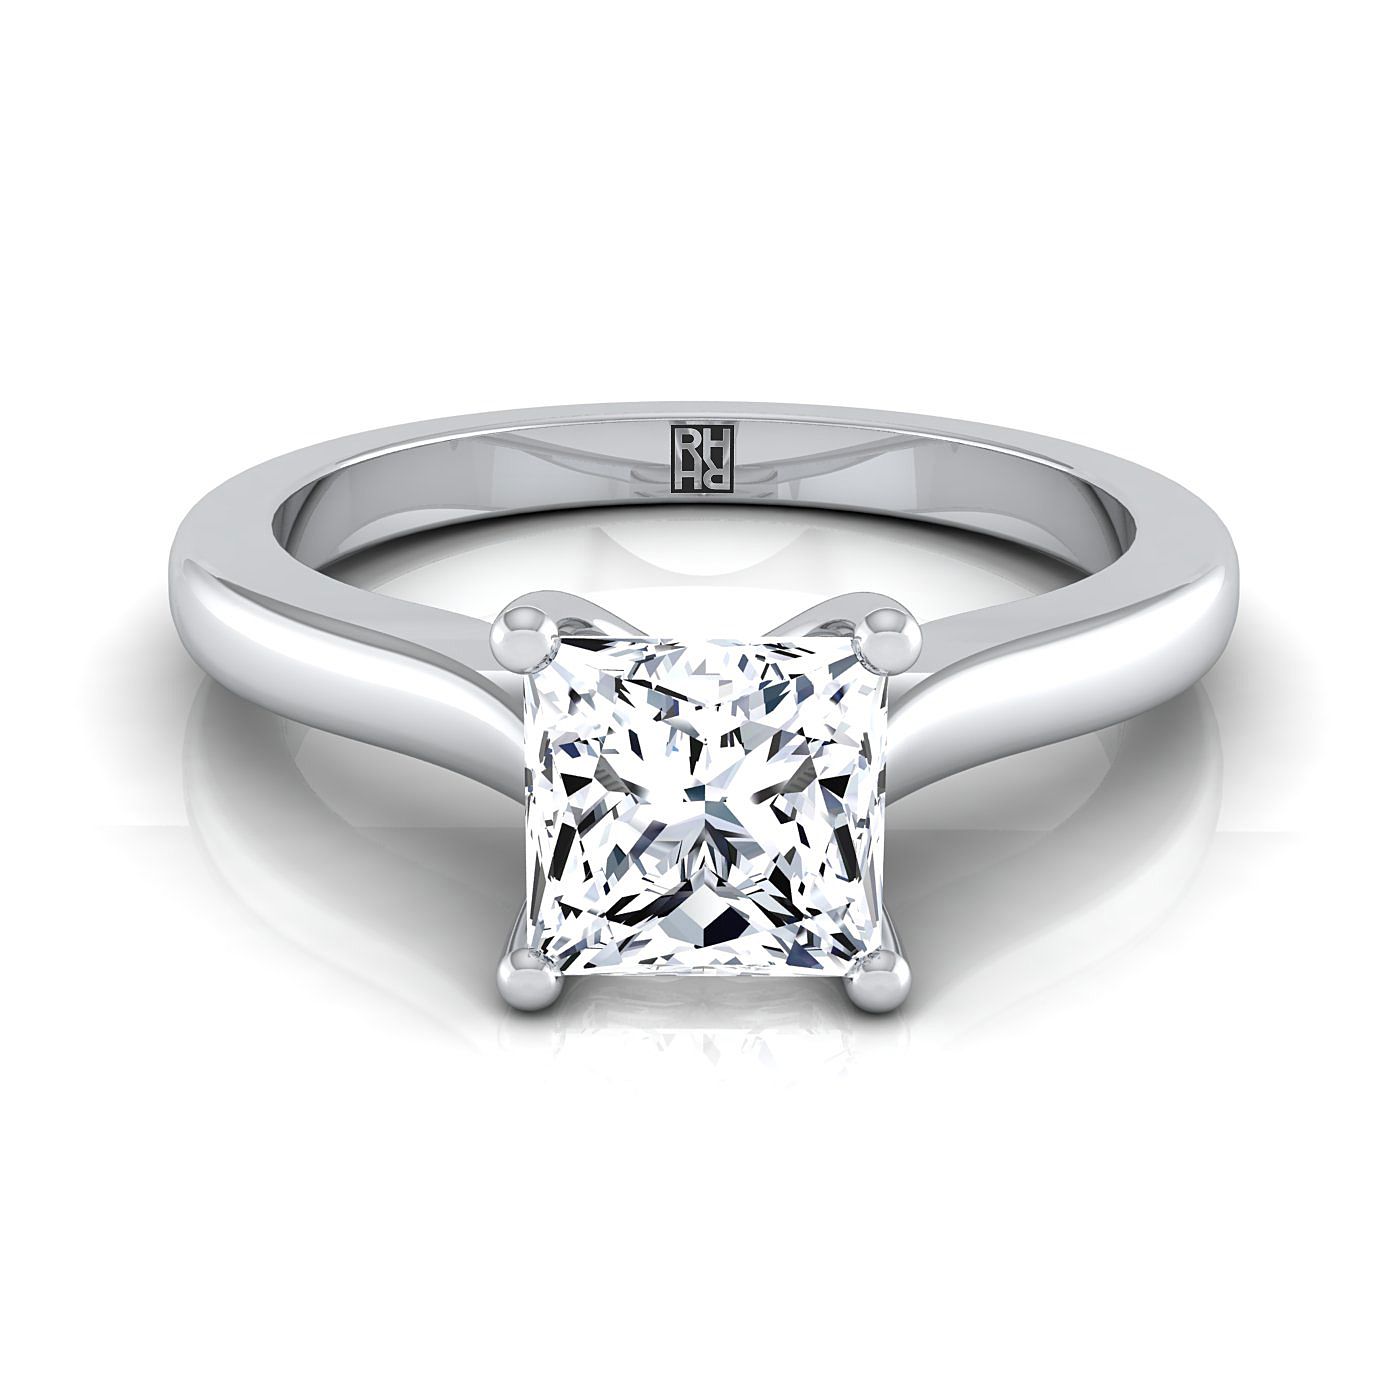 14K White Gold Princess Cut Comfort Fit Cathedral Solitaire Diamond Engagement Ring